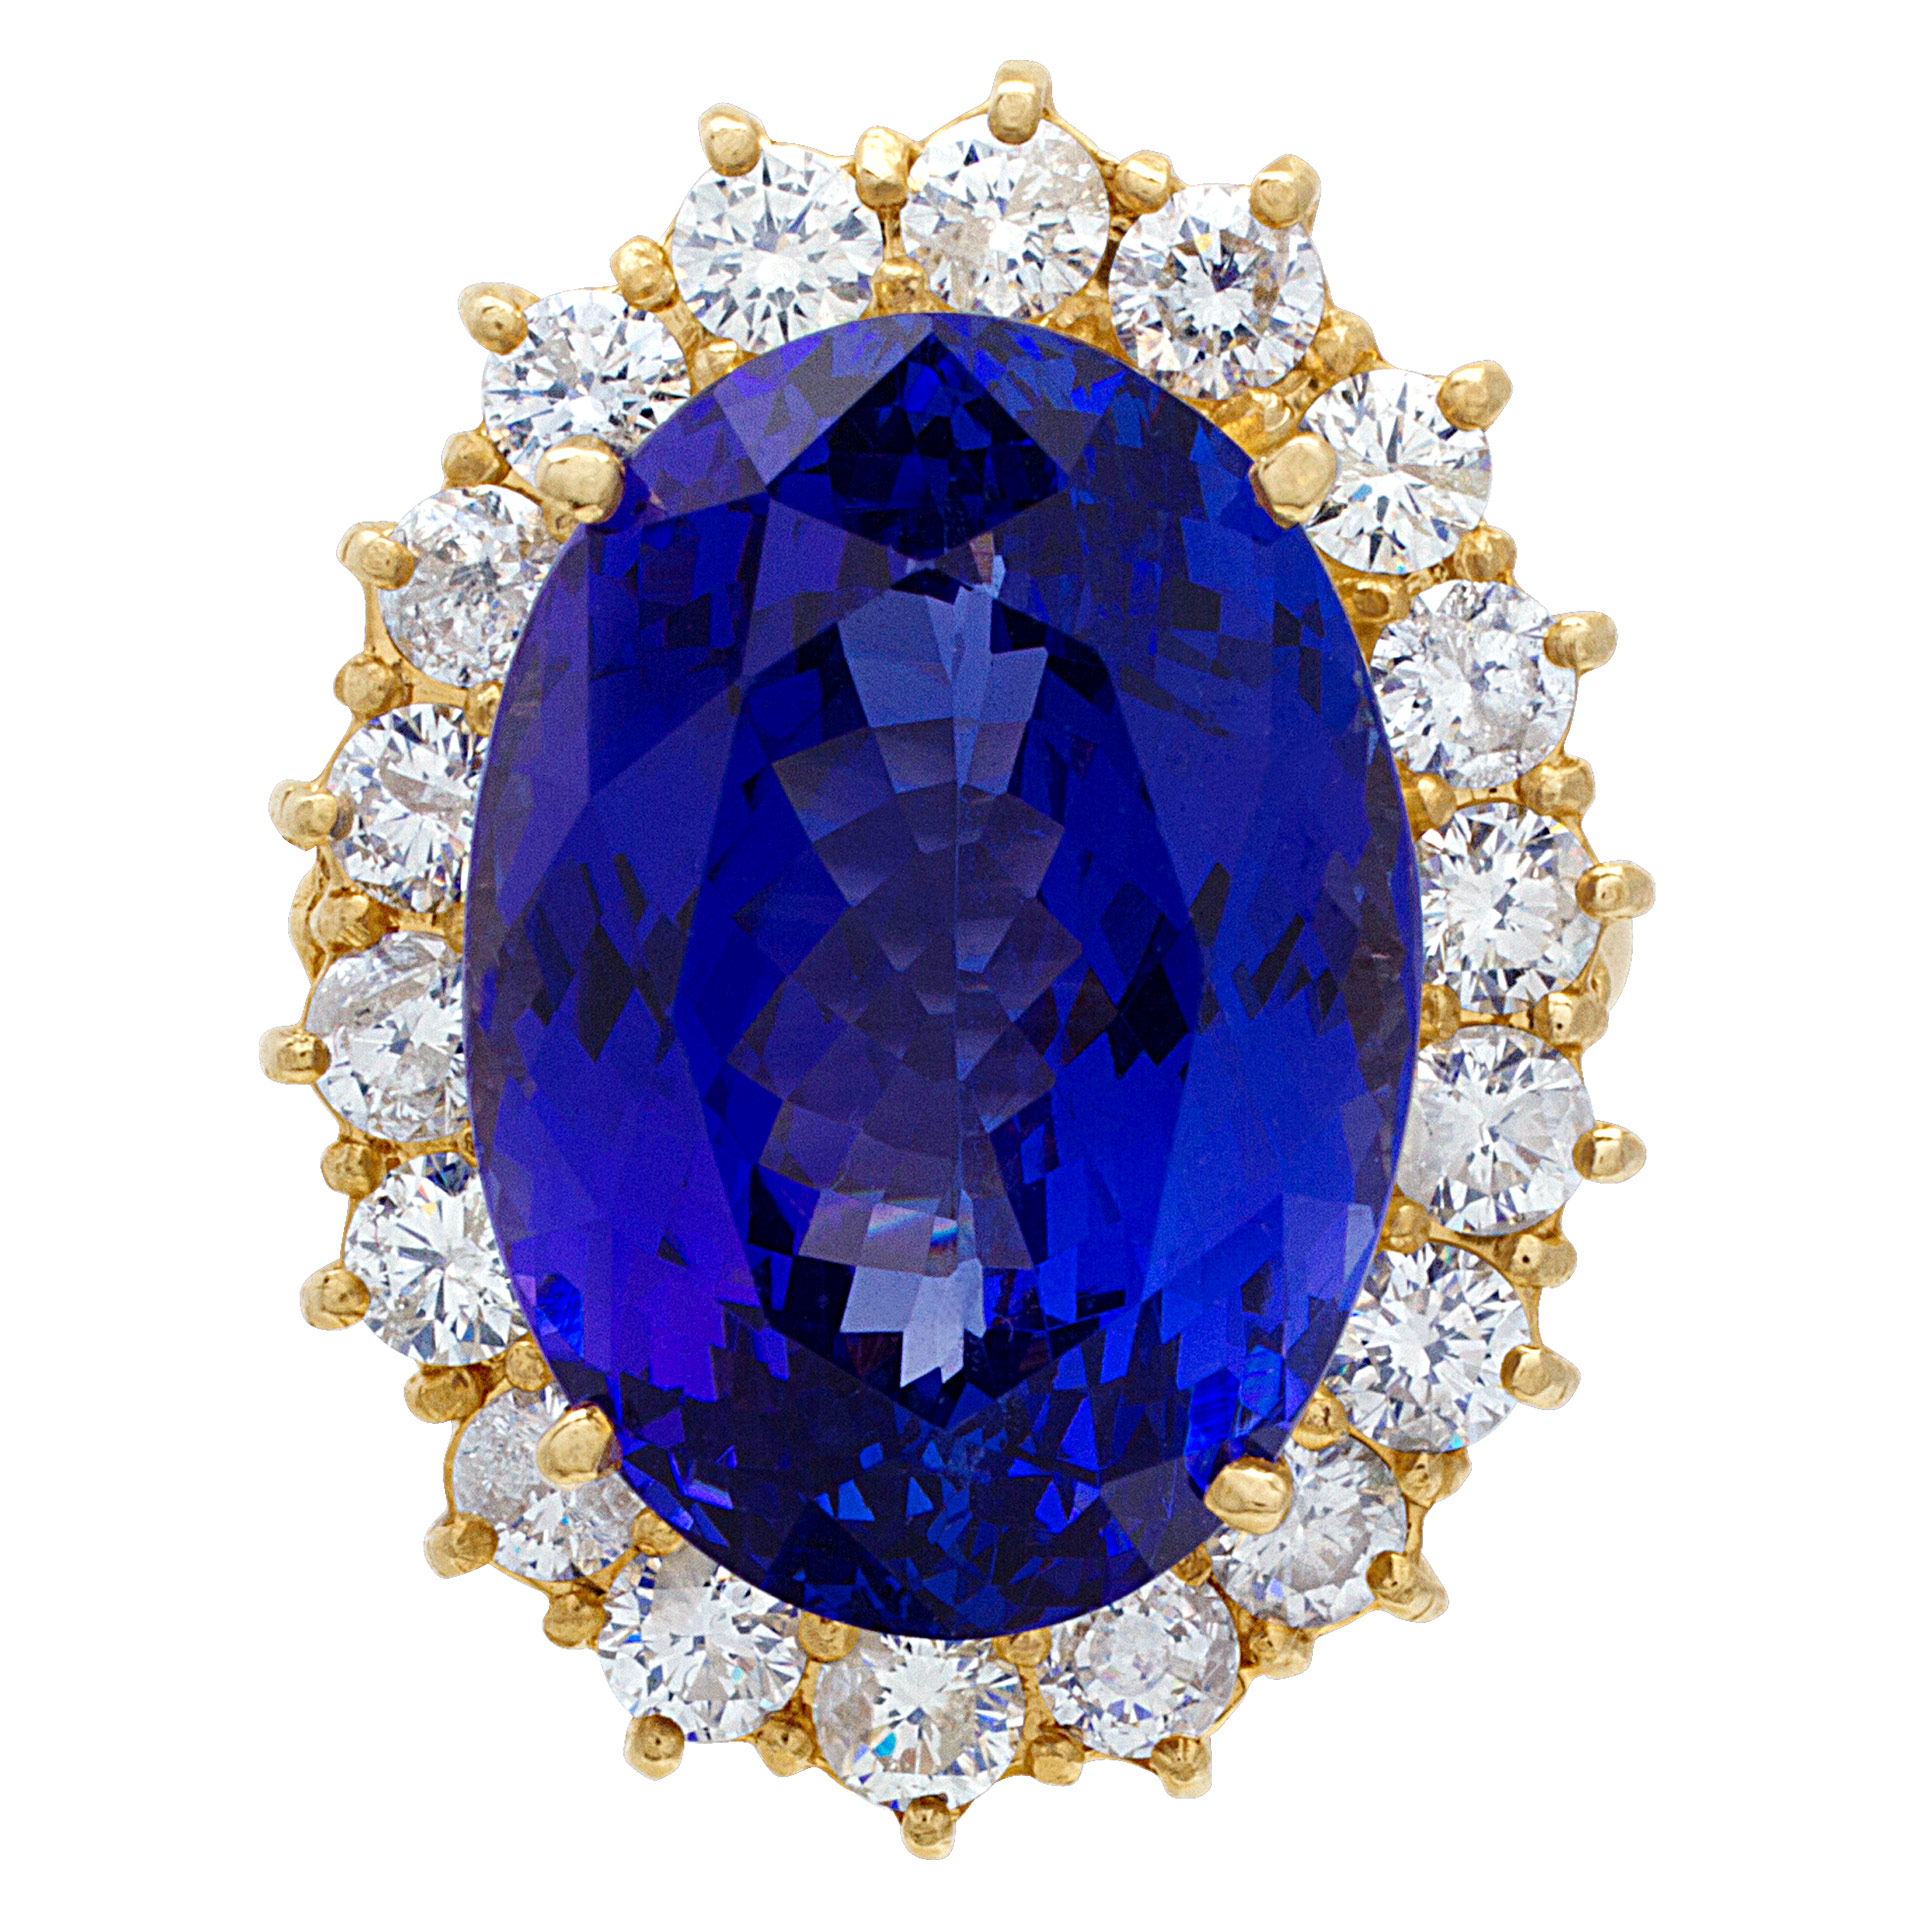 Tanzanite and diamond ring in 14k gold with approx. 25 carats tanzanite image 1